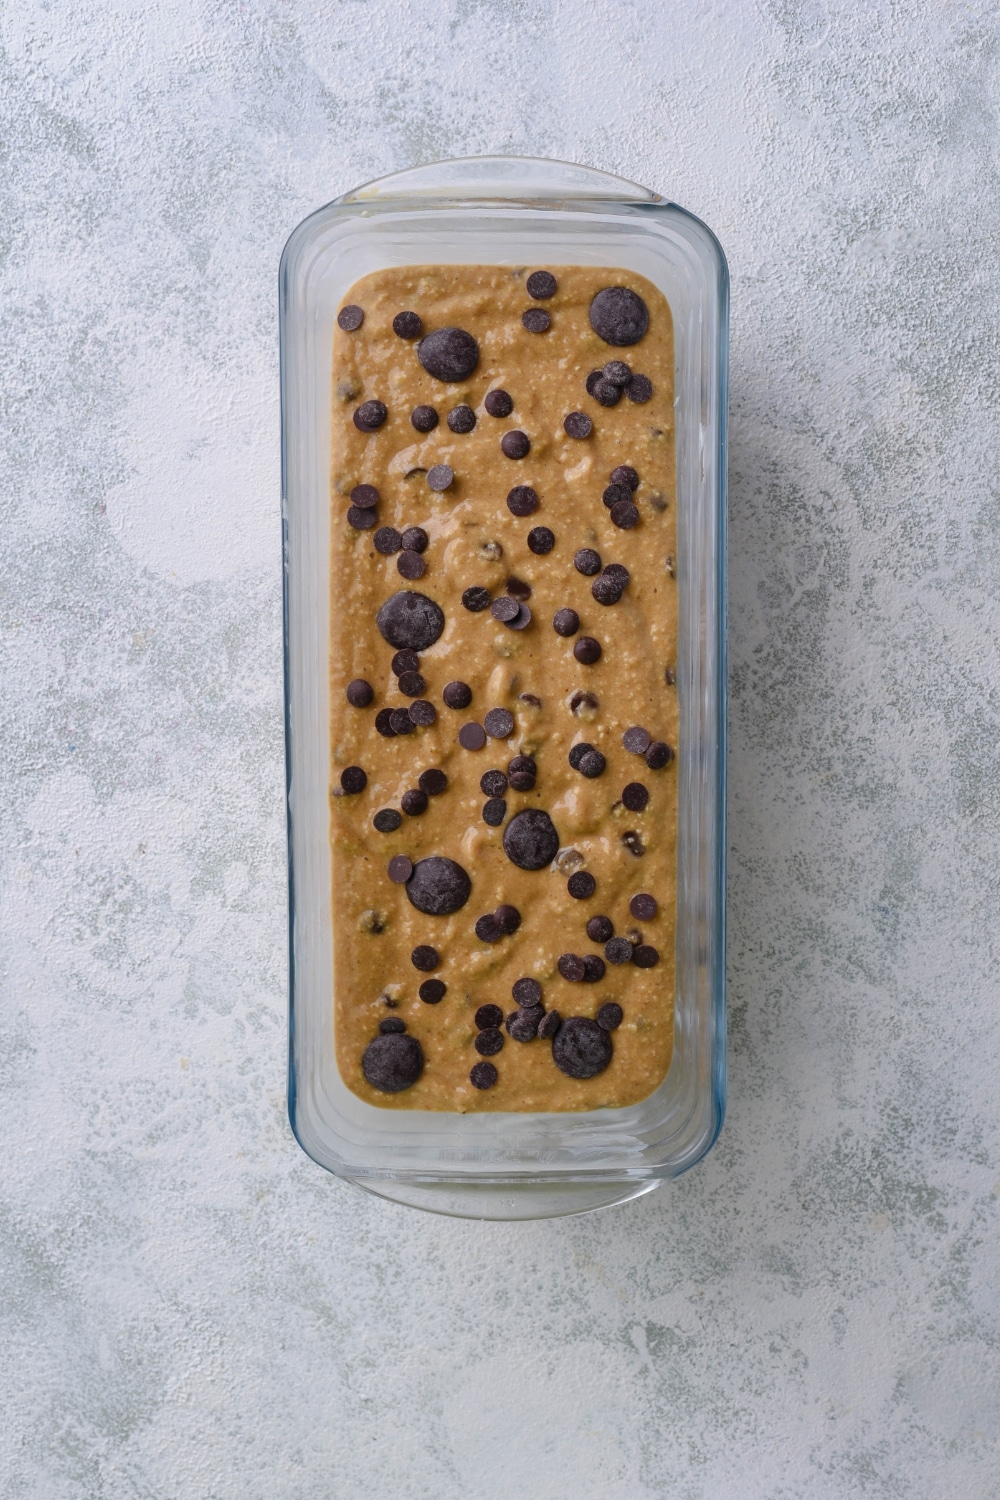 Uncooked banana bread batter topped with chocolate chips in a loaf pan.